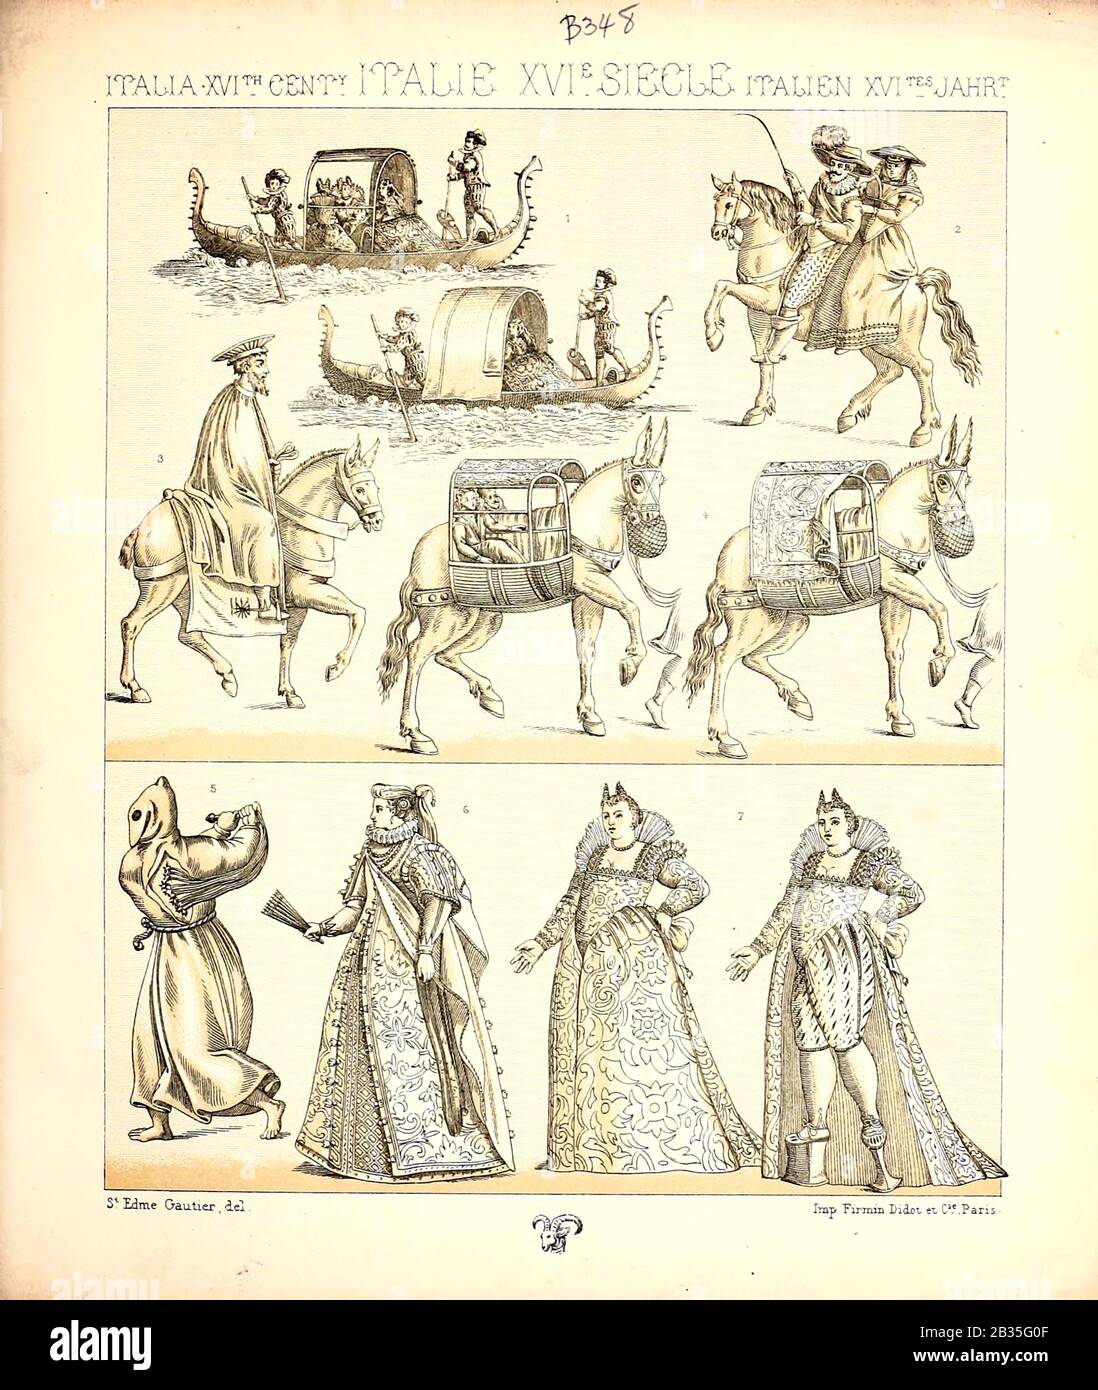 Ancient Italian fashion and lifestyle, 16th century from Geschichte des kostums in chronologischer entwicklung (History of the costume in chronological development) by Racinet, A. (Auguste), 1825-1893. and Rosenberg, Adolf, 1850-1906, Volume 3 printed in Berlin in 1888 Stock Photo